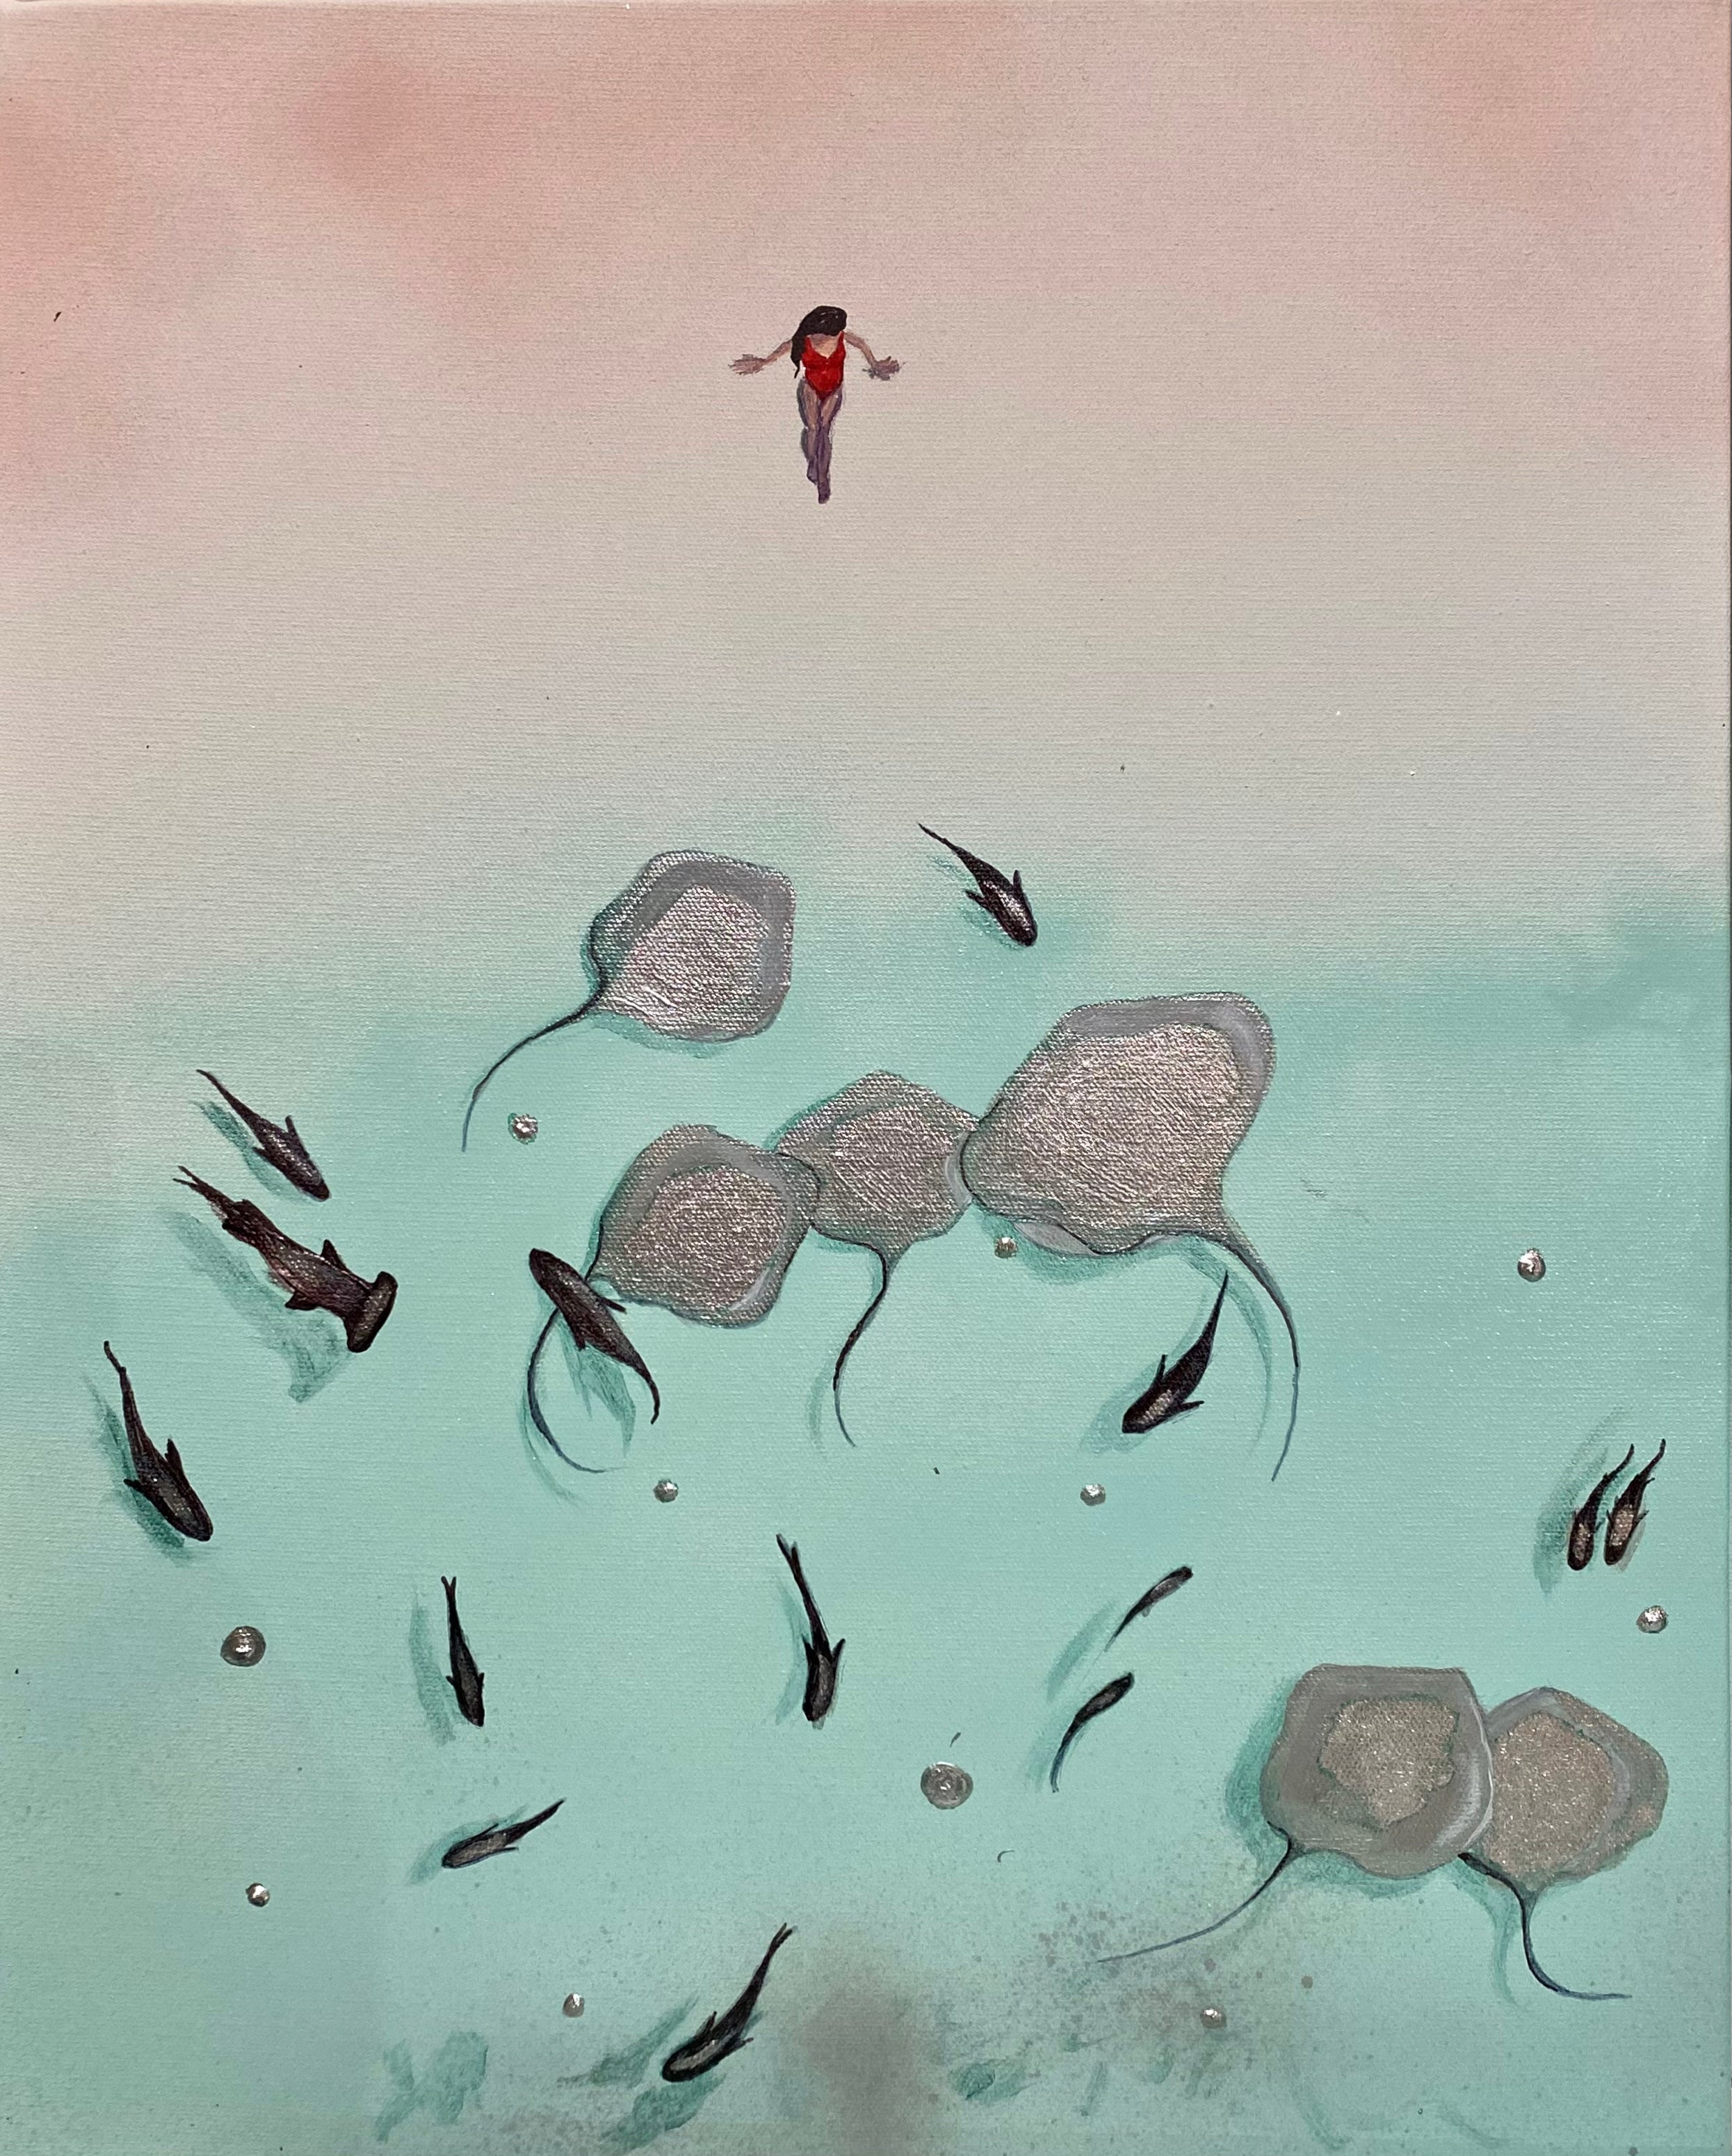 Someone is waiting for me 2 - Maldives - Sting rays - Ocean Mini Artwork Gift